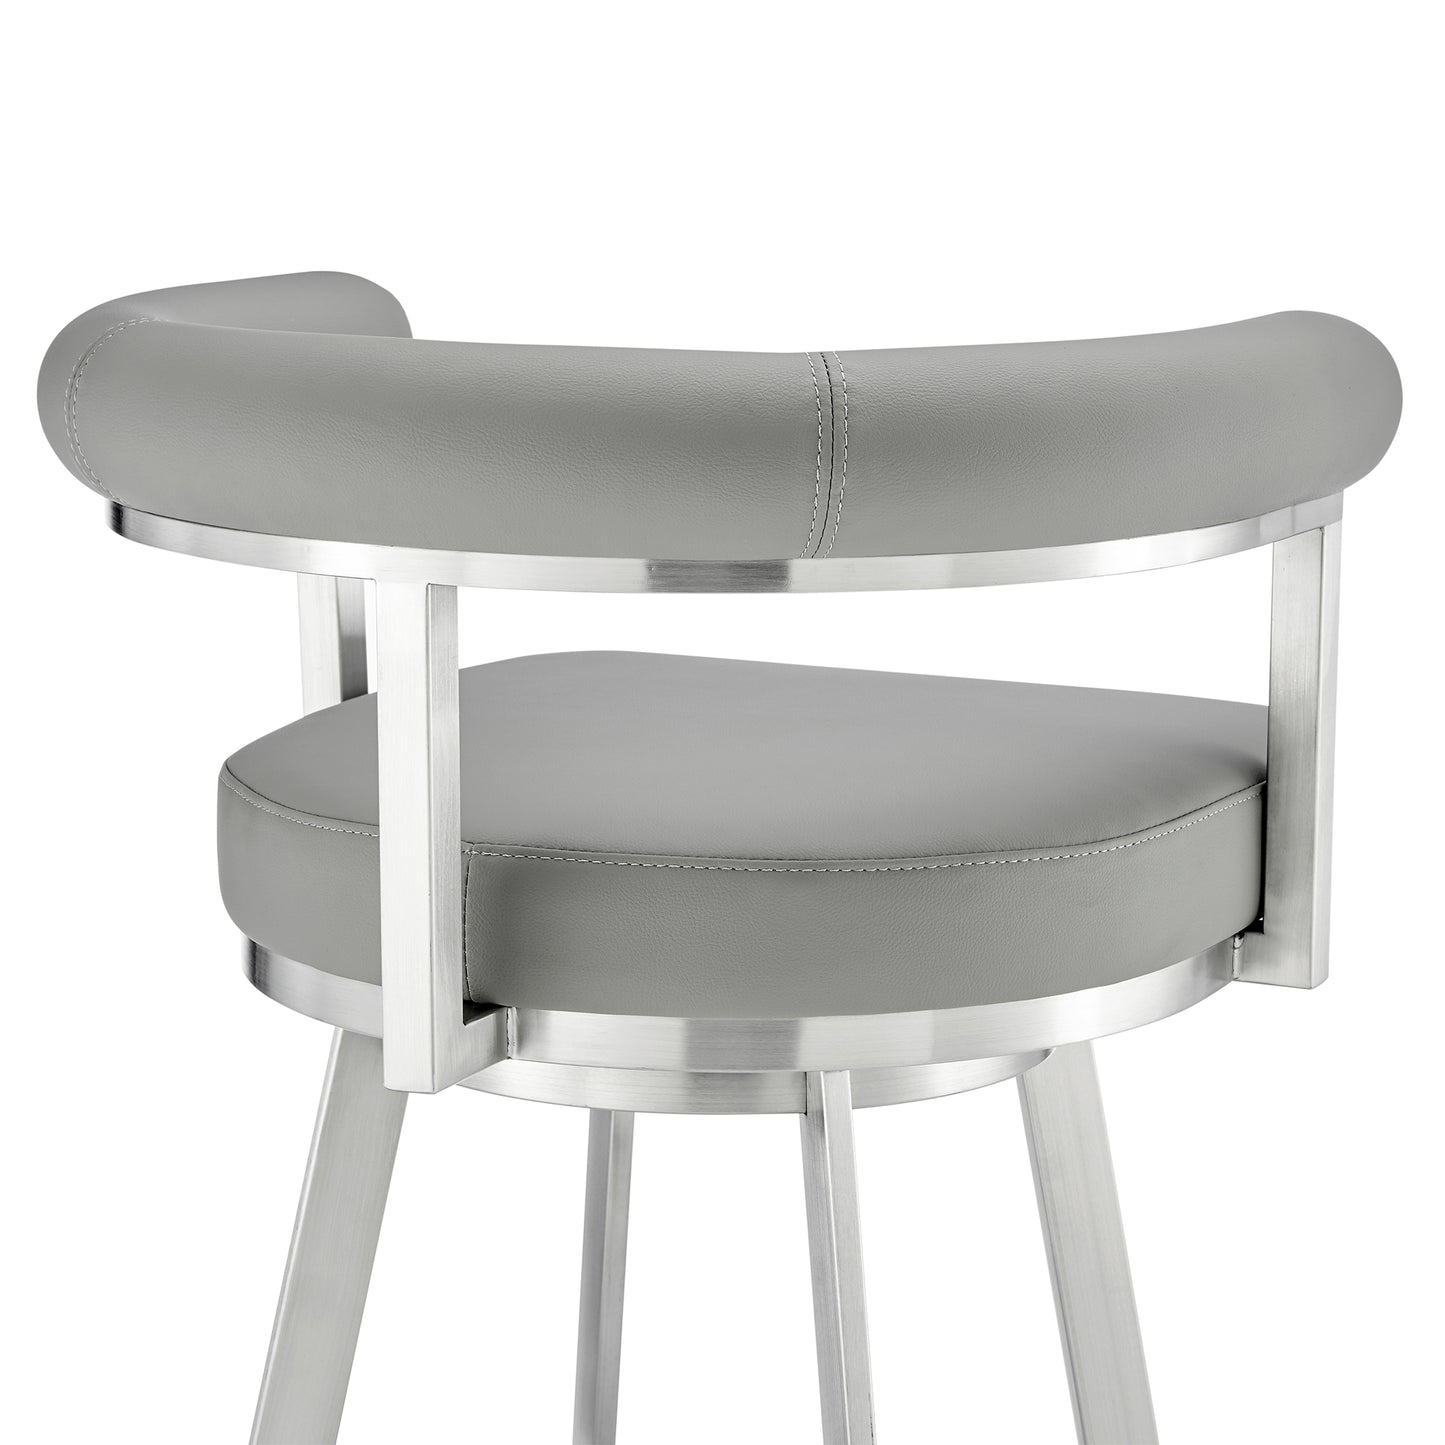 Magnolia 26" Swivel Counter Stool in Brushed Stainless Steel with Light Gray Faux Leather